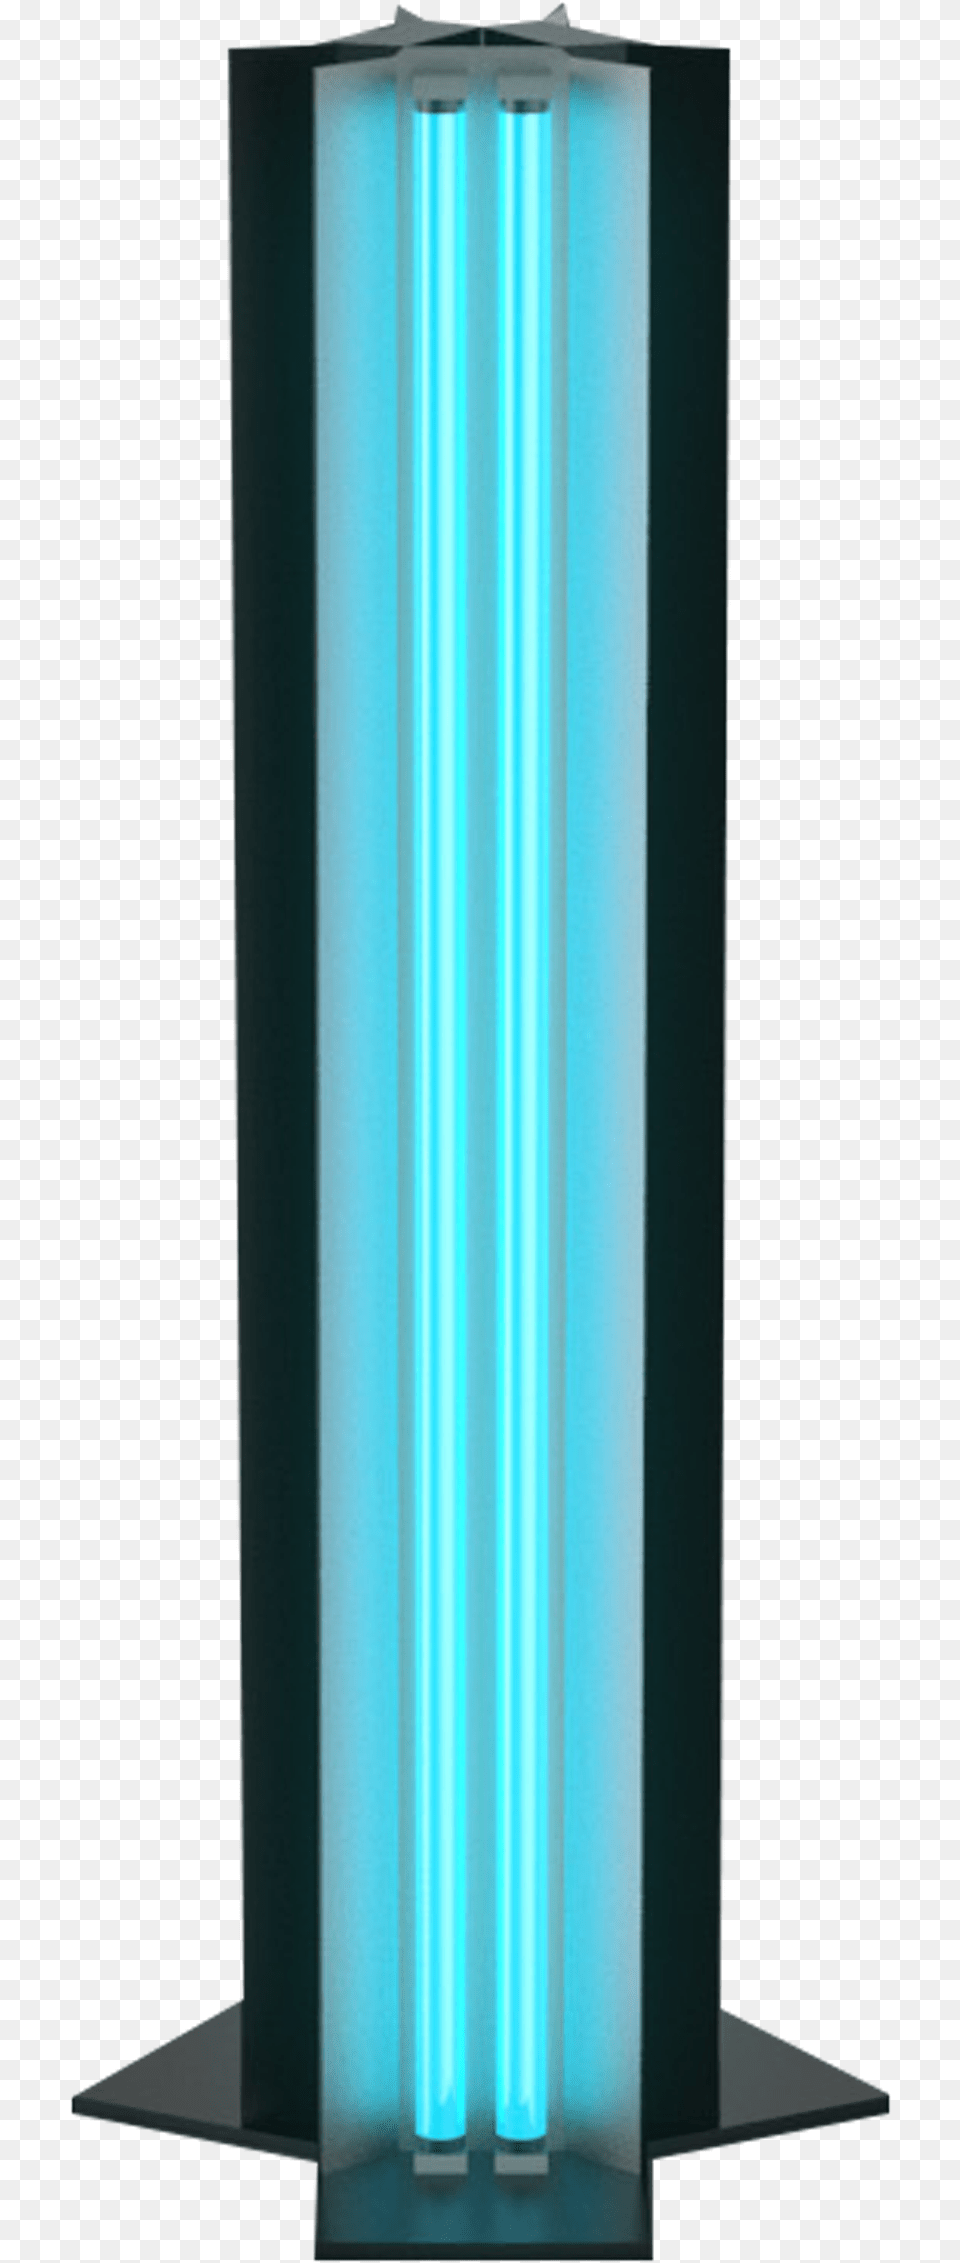 About Us Cylinder, Light Png